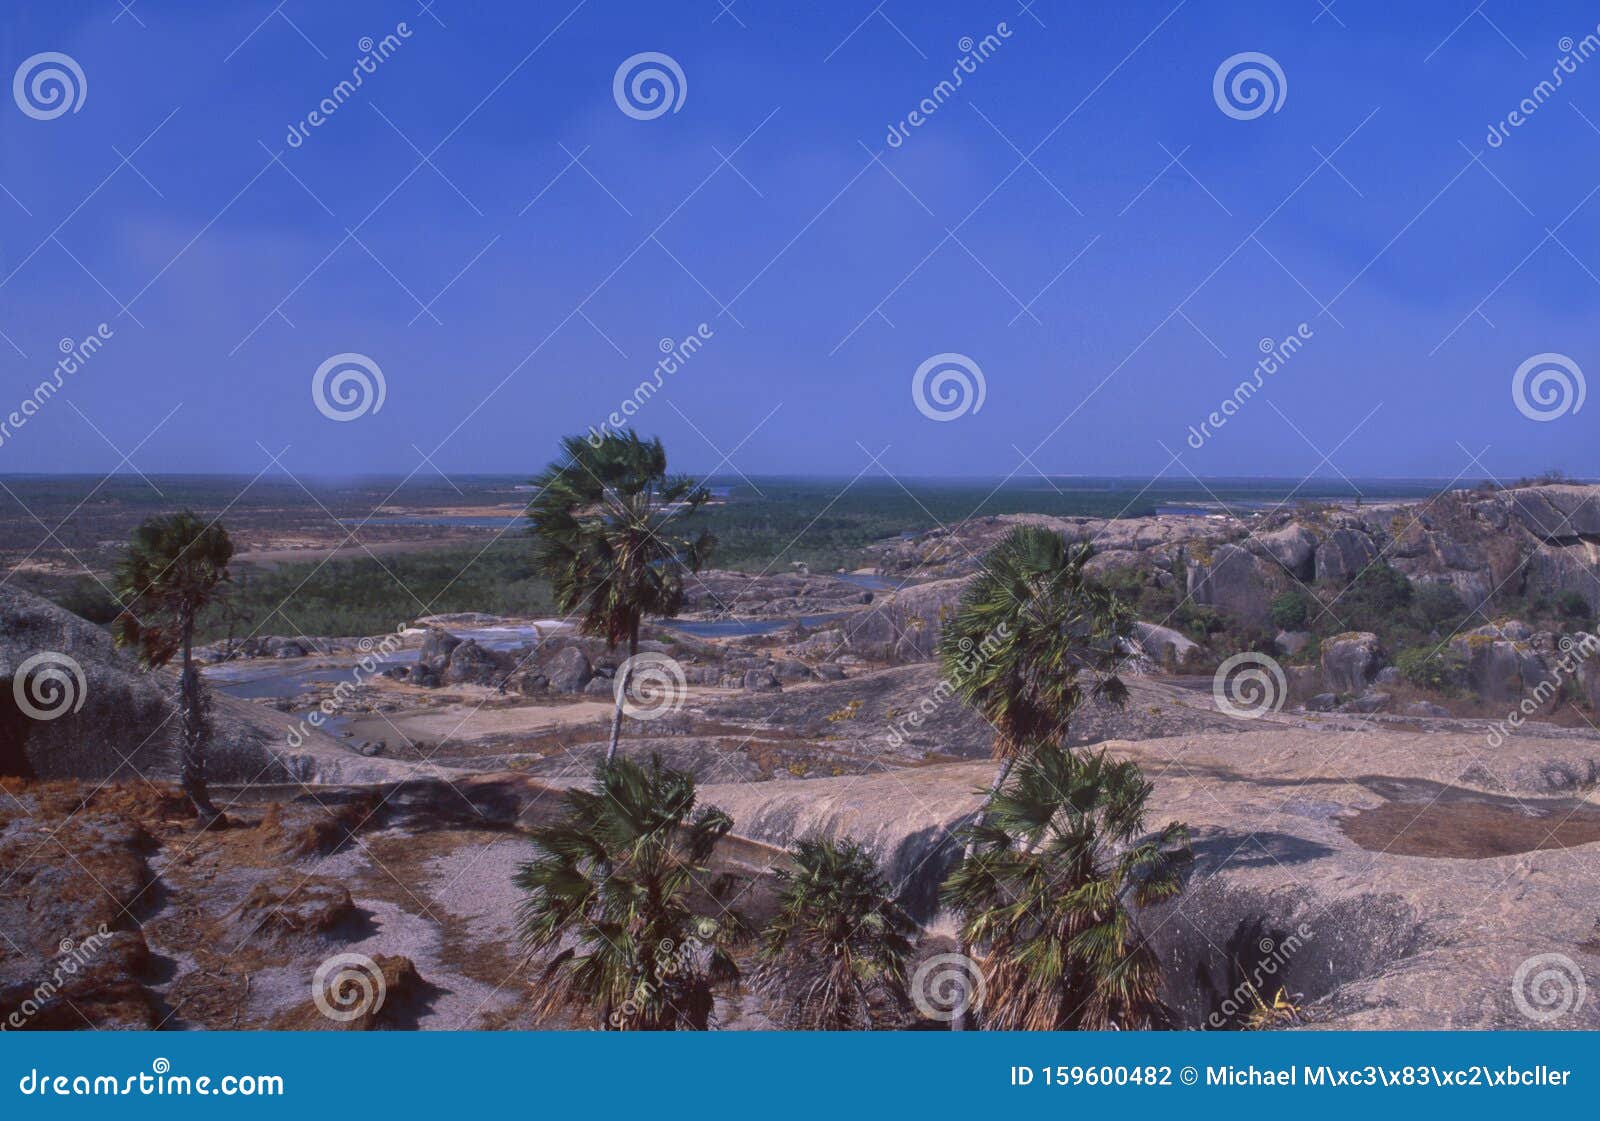 brazil: the stone formations at the coastal boarder of the states maranhao and piau